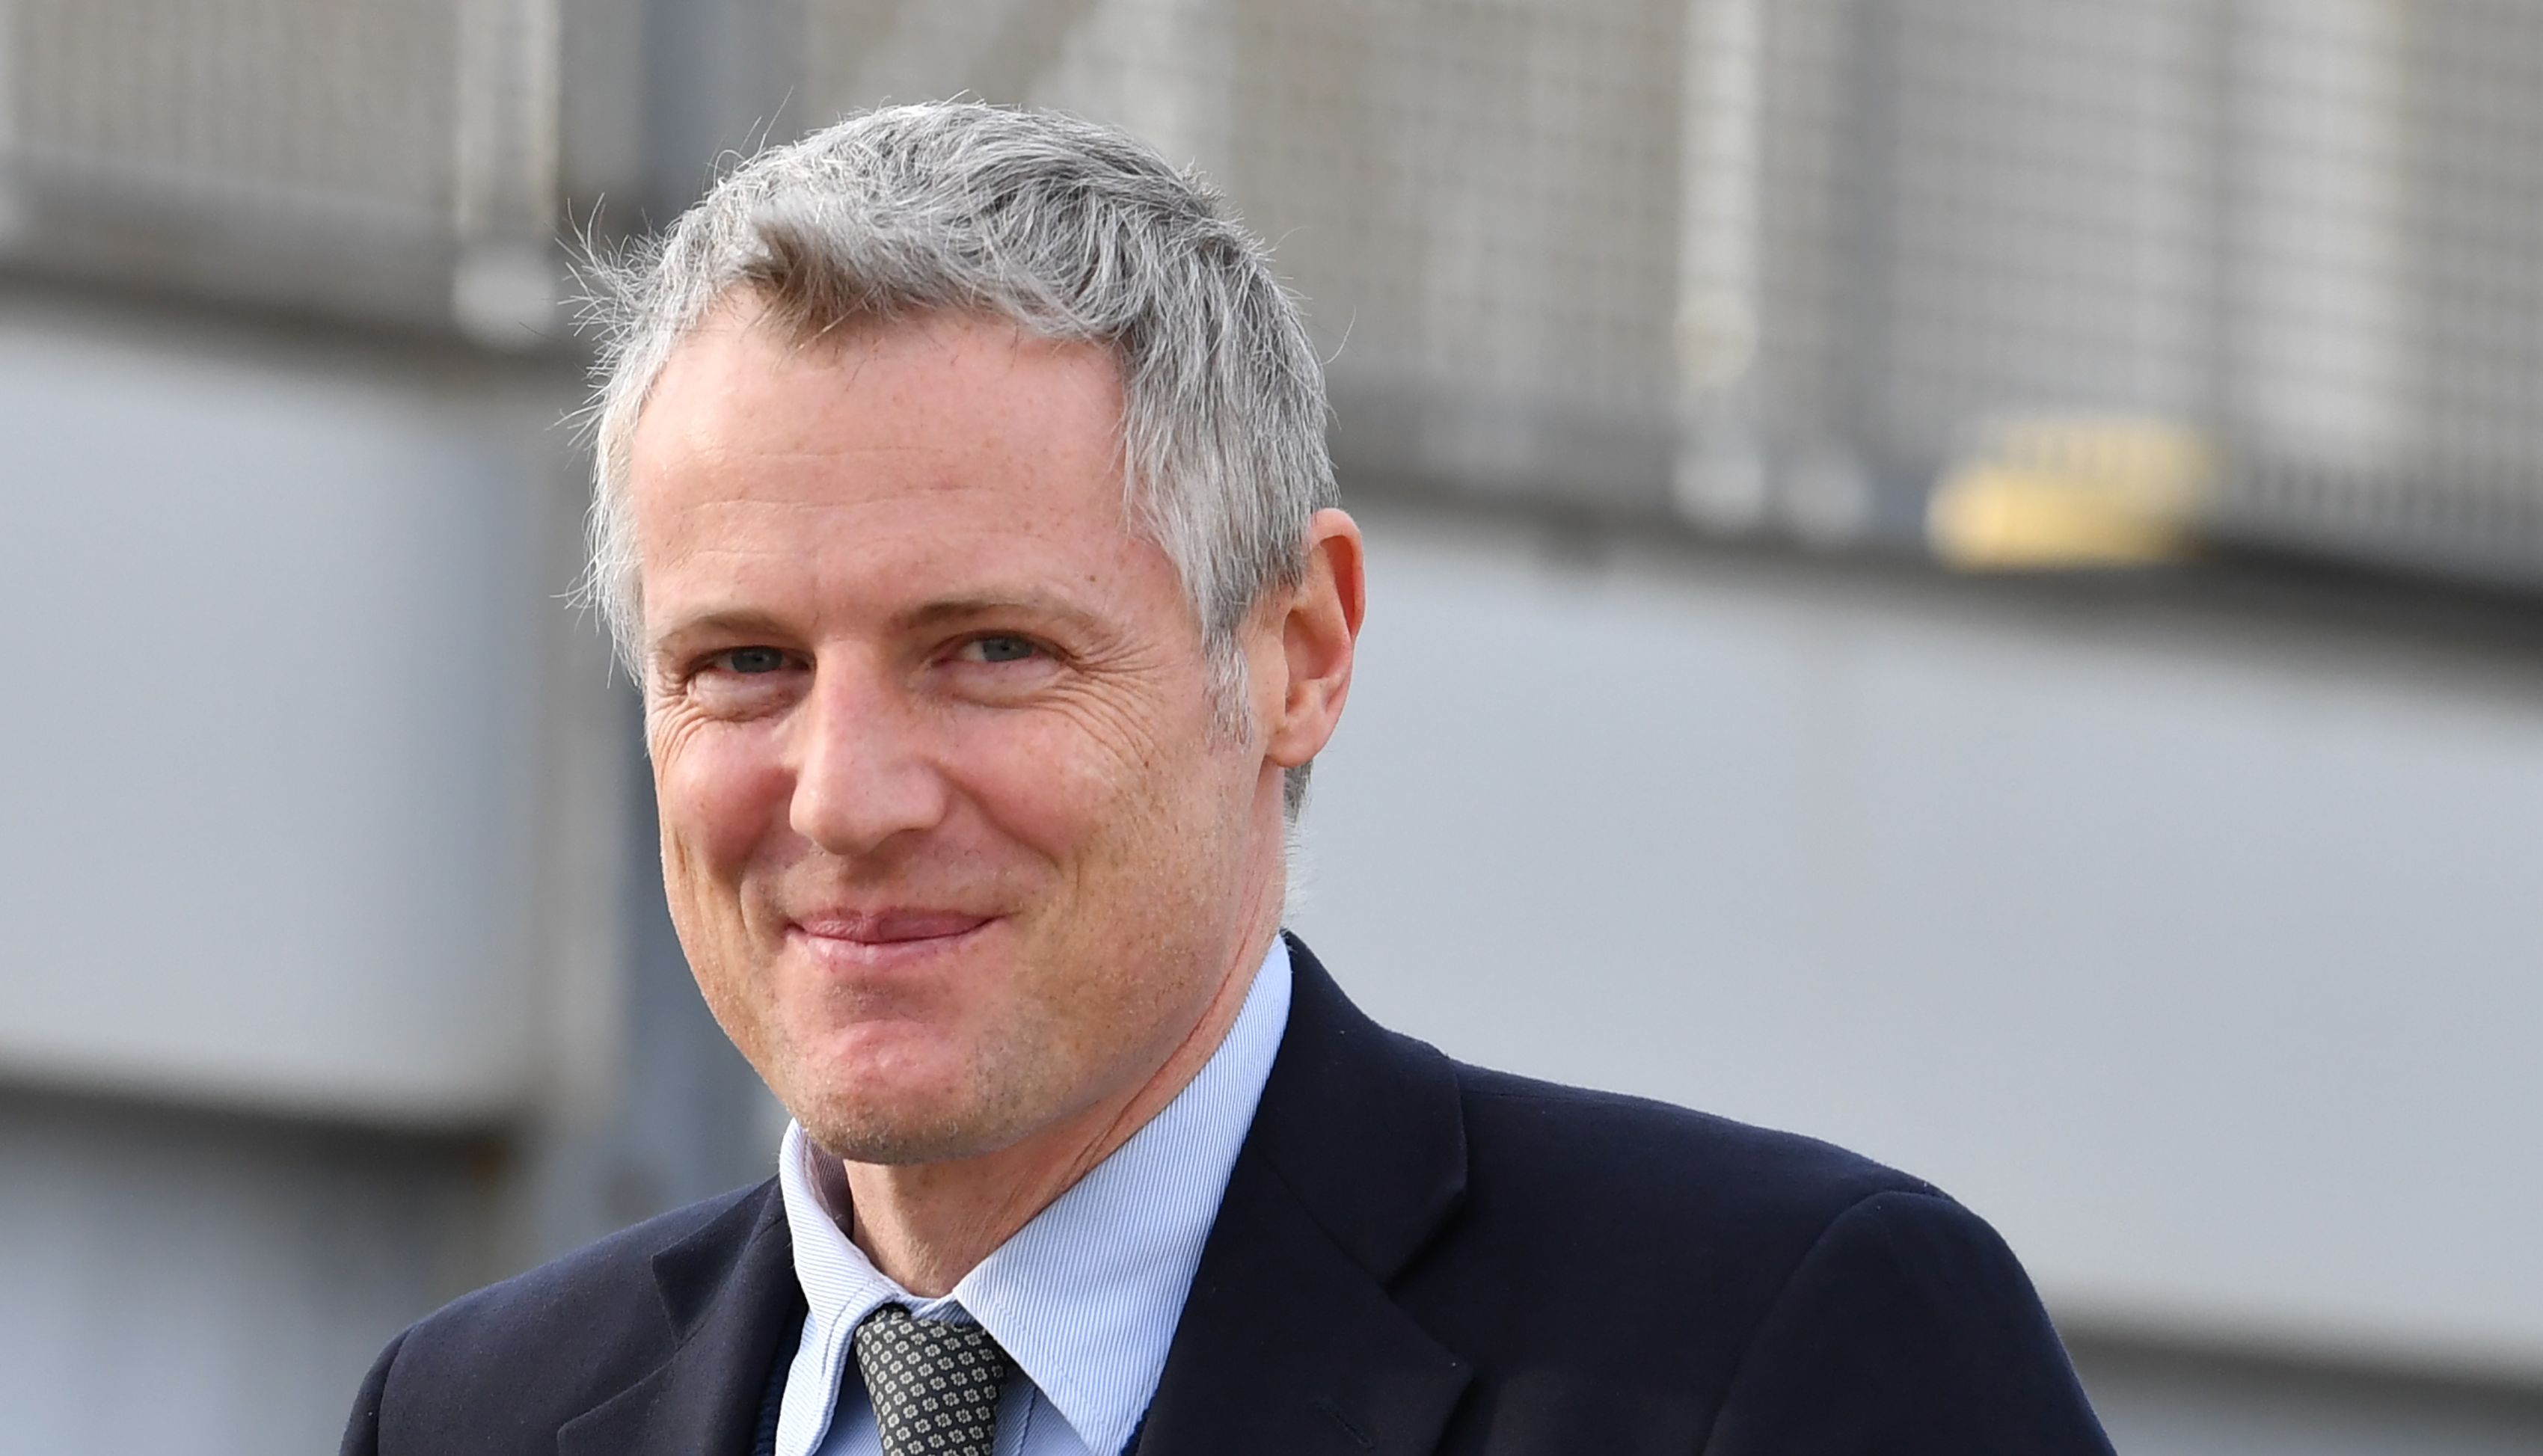 Lord Zac Goldsmith was made a life peer shortly after voters dumped him as the MP for Richmond Park in a defeat to the Liberal Democrats in 2019